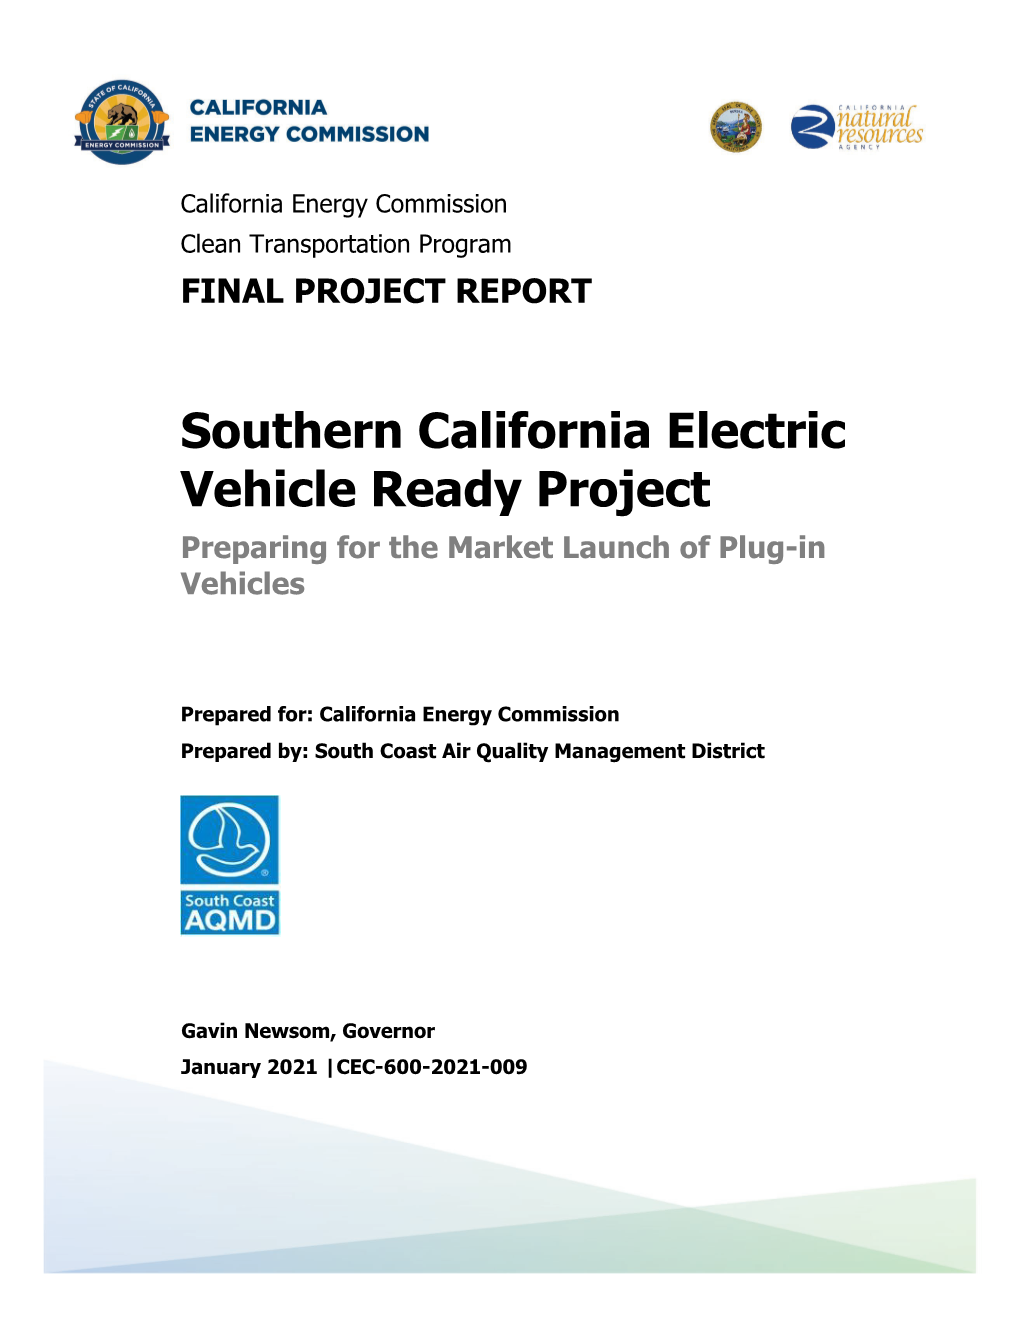 Southern California Electric Vehicle Ready Project Preparing for the Market Launch of Plug-In Vehicles